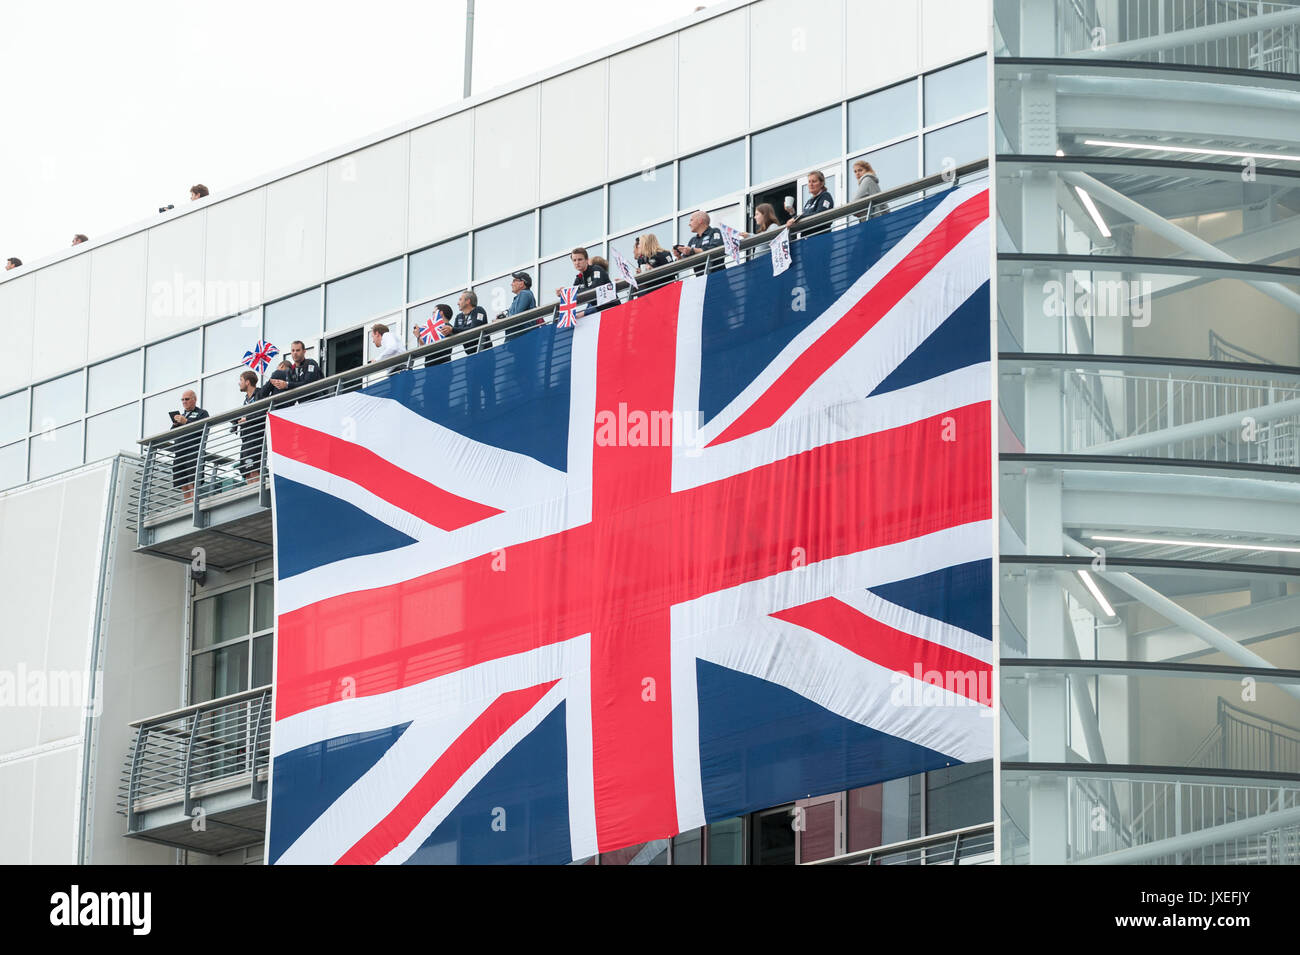 A large union jack flag hanging on the Ben Ainslie Racing HQ building in Old Portsmouth, Hampshire, England. The flag was hung to celebrate the arrival of HMS Queen Elizabeth into Portsmouth Harbour. Stock Photo